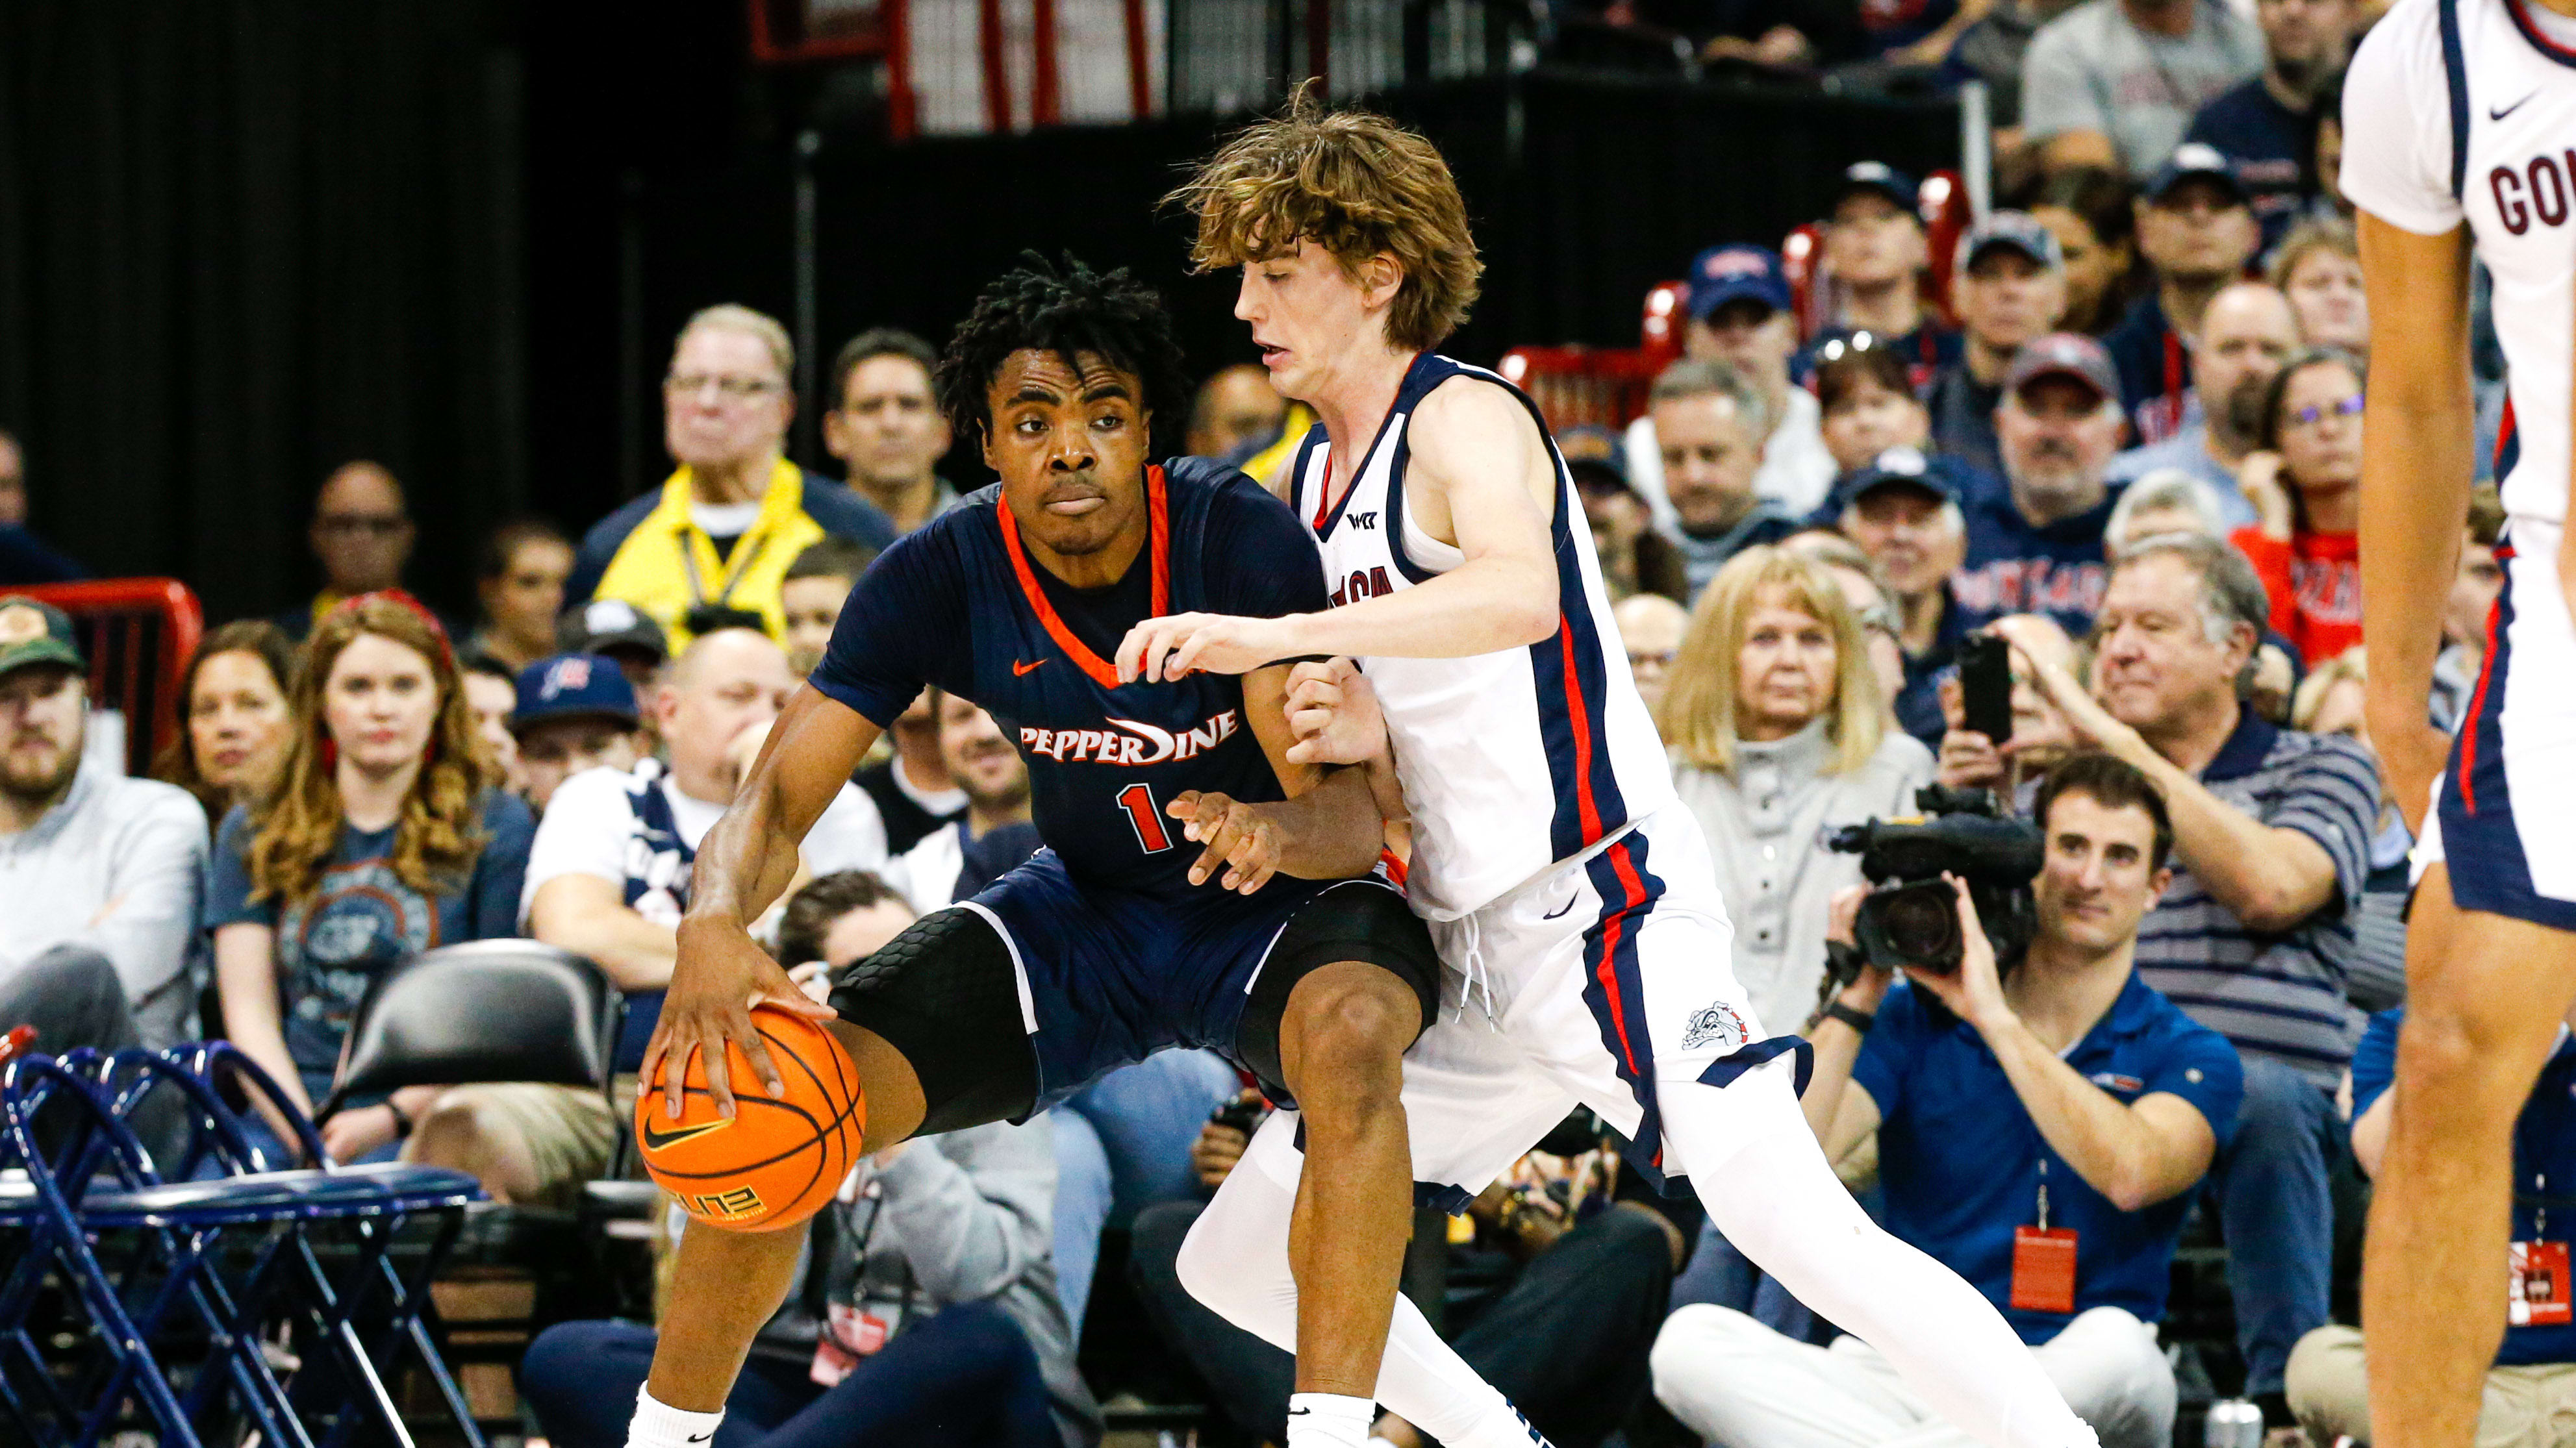 WCC Transfer Portal Update: Ranking the Top Men’s Basketball Transfers and Acquisitions